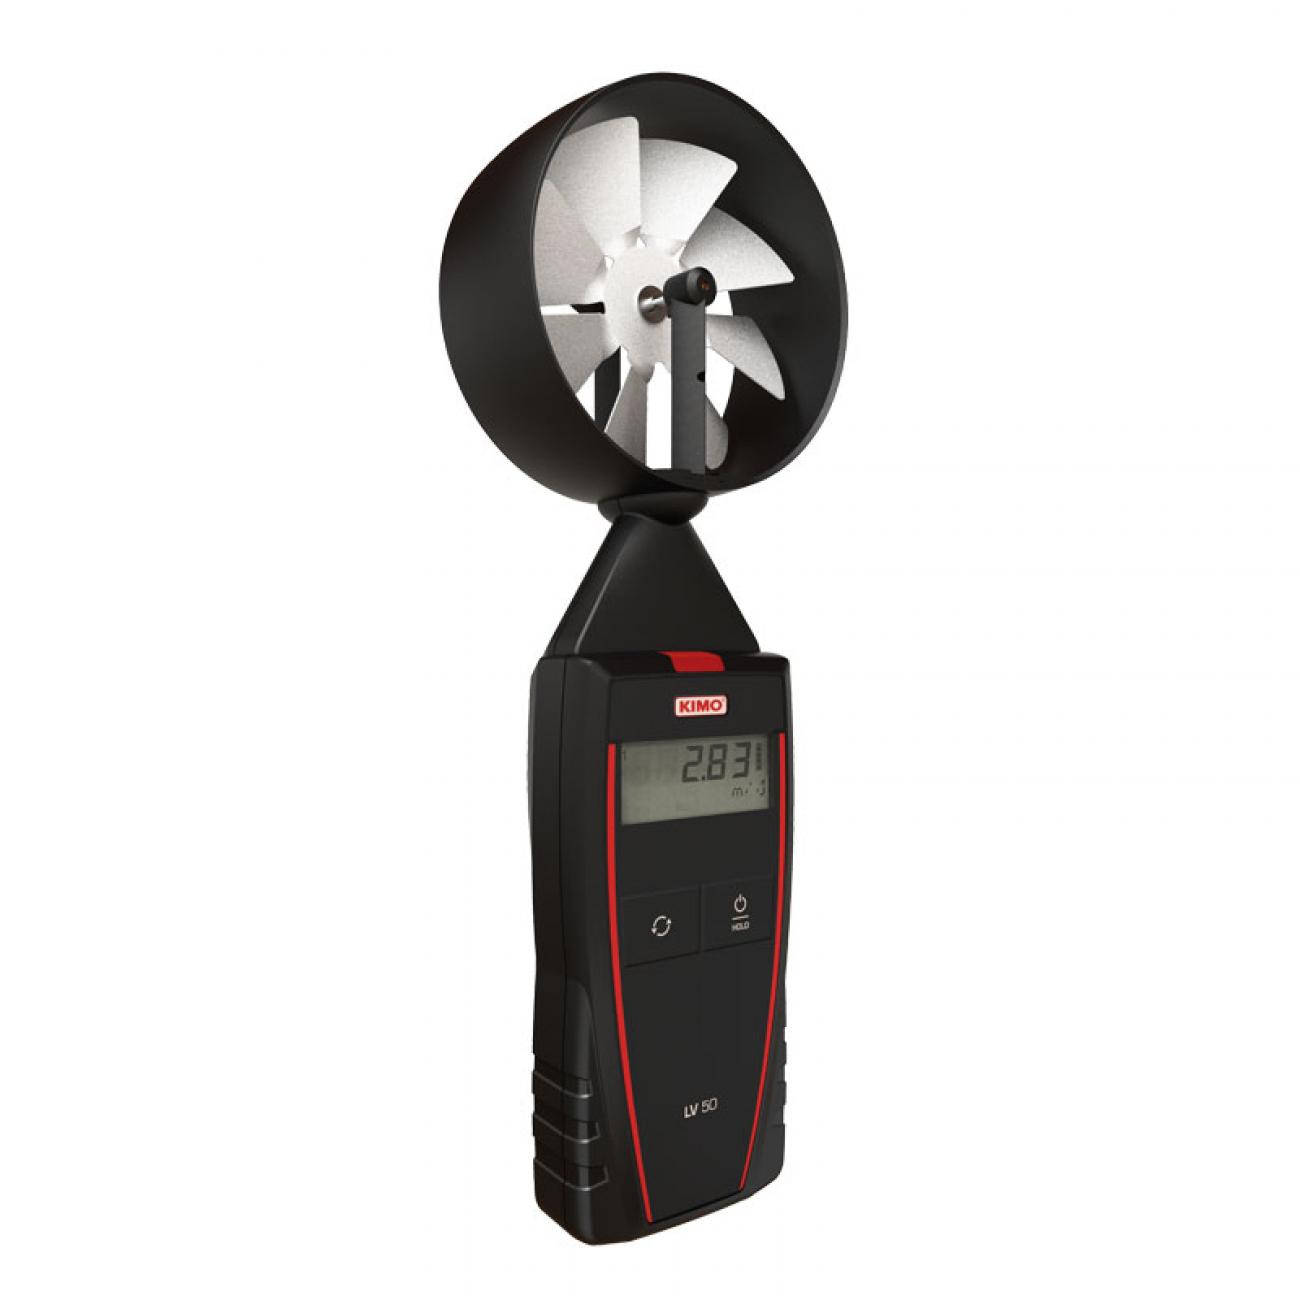 LV 50 Thermo-anemometer with integrated vane probe